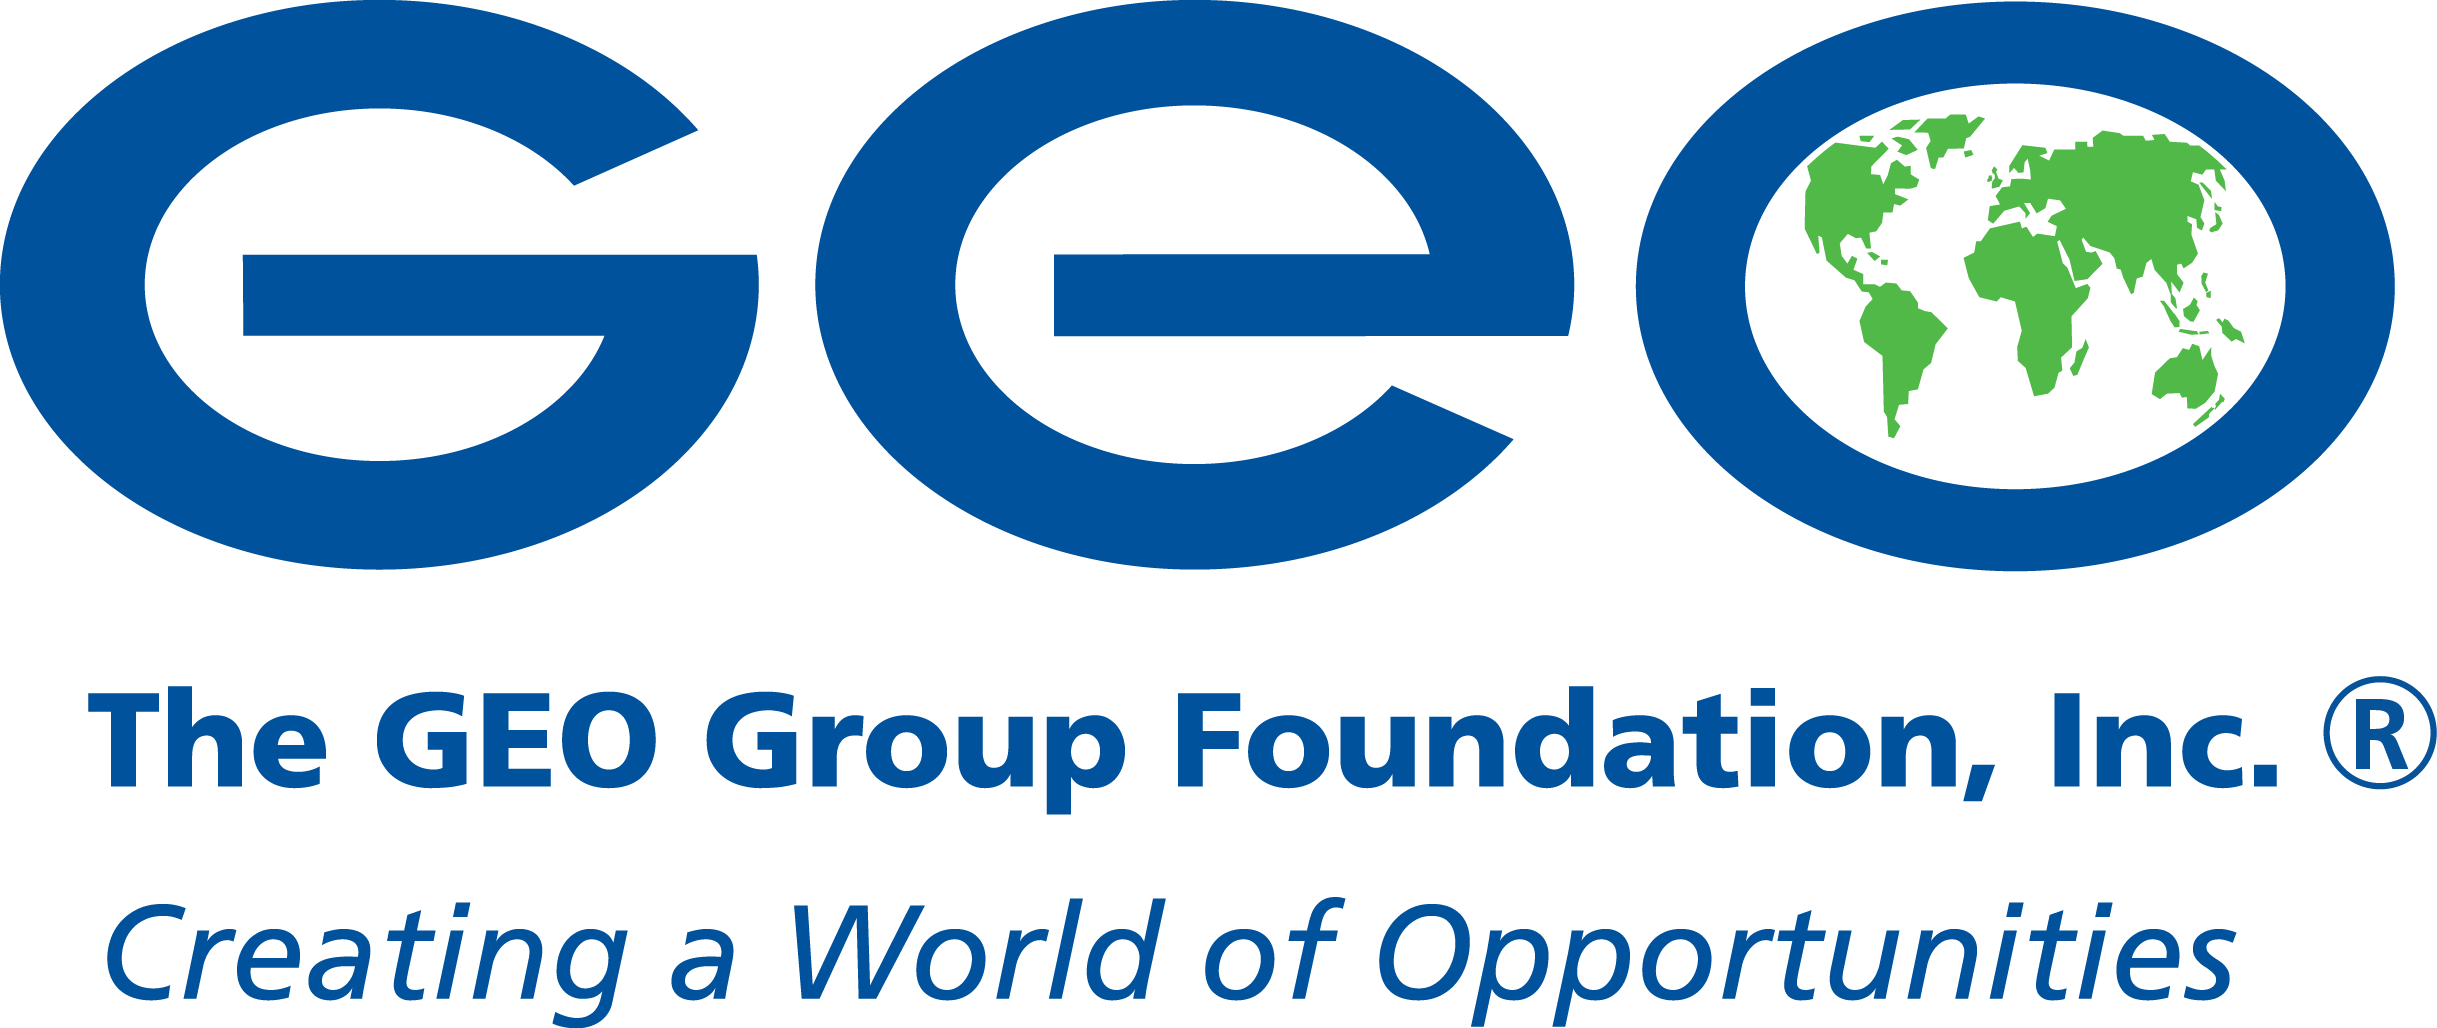 g. GEO Group Foundation (Finish Line and Thank You Brigade)